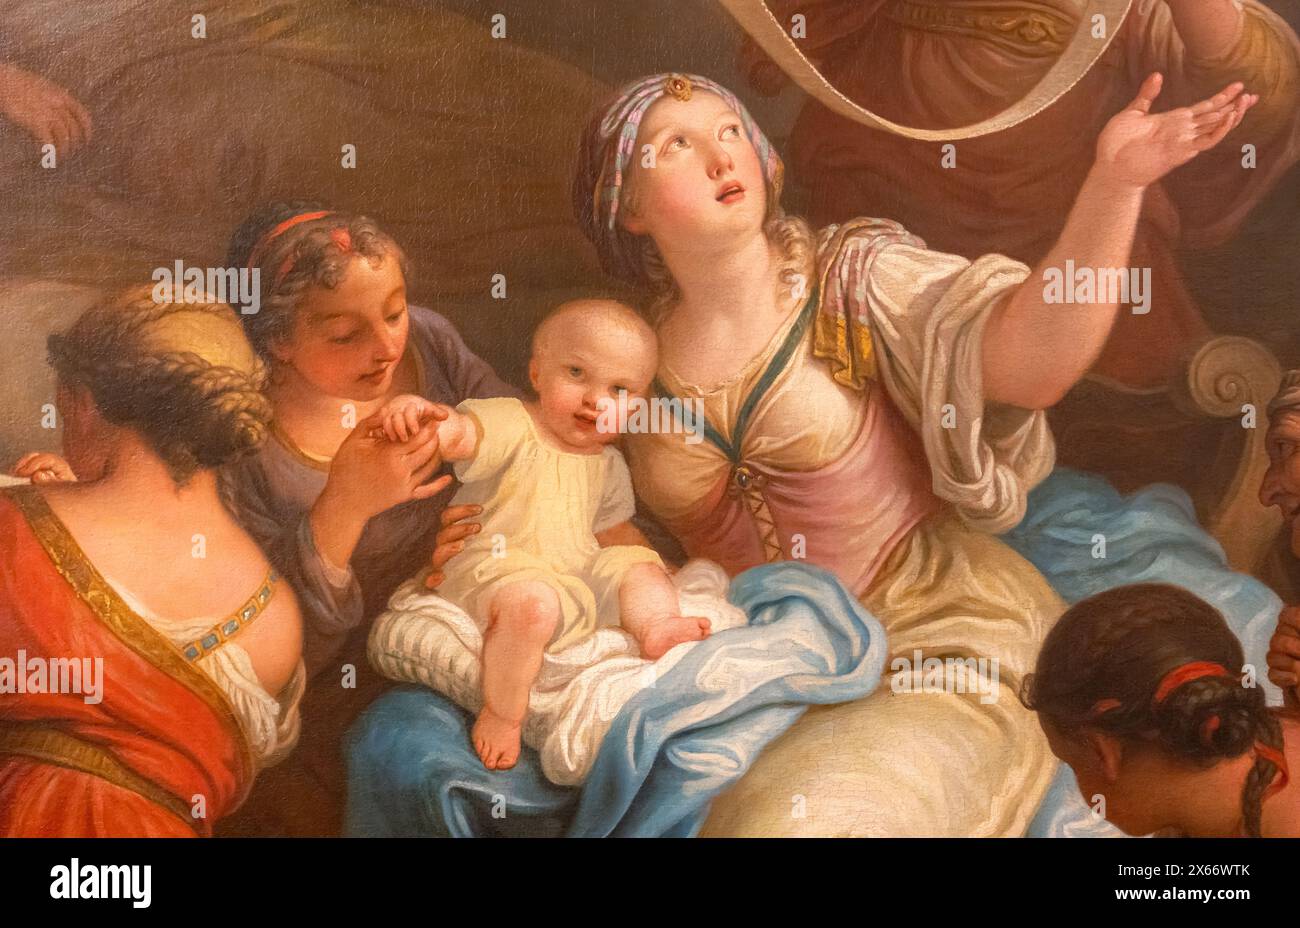 Detail of vintage italian painting showing medieval women taking care of a baby Stock Photo